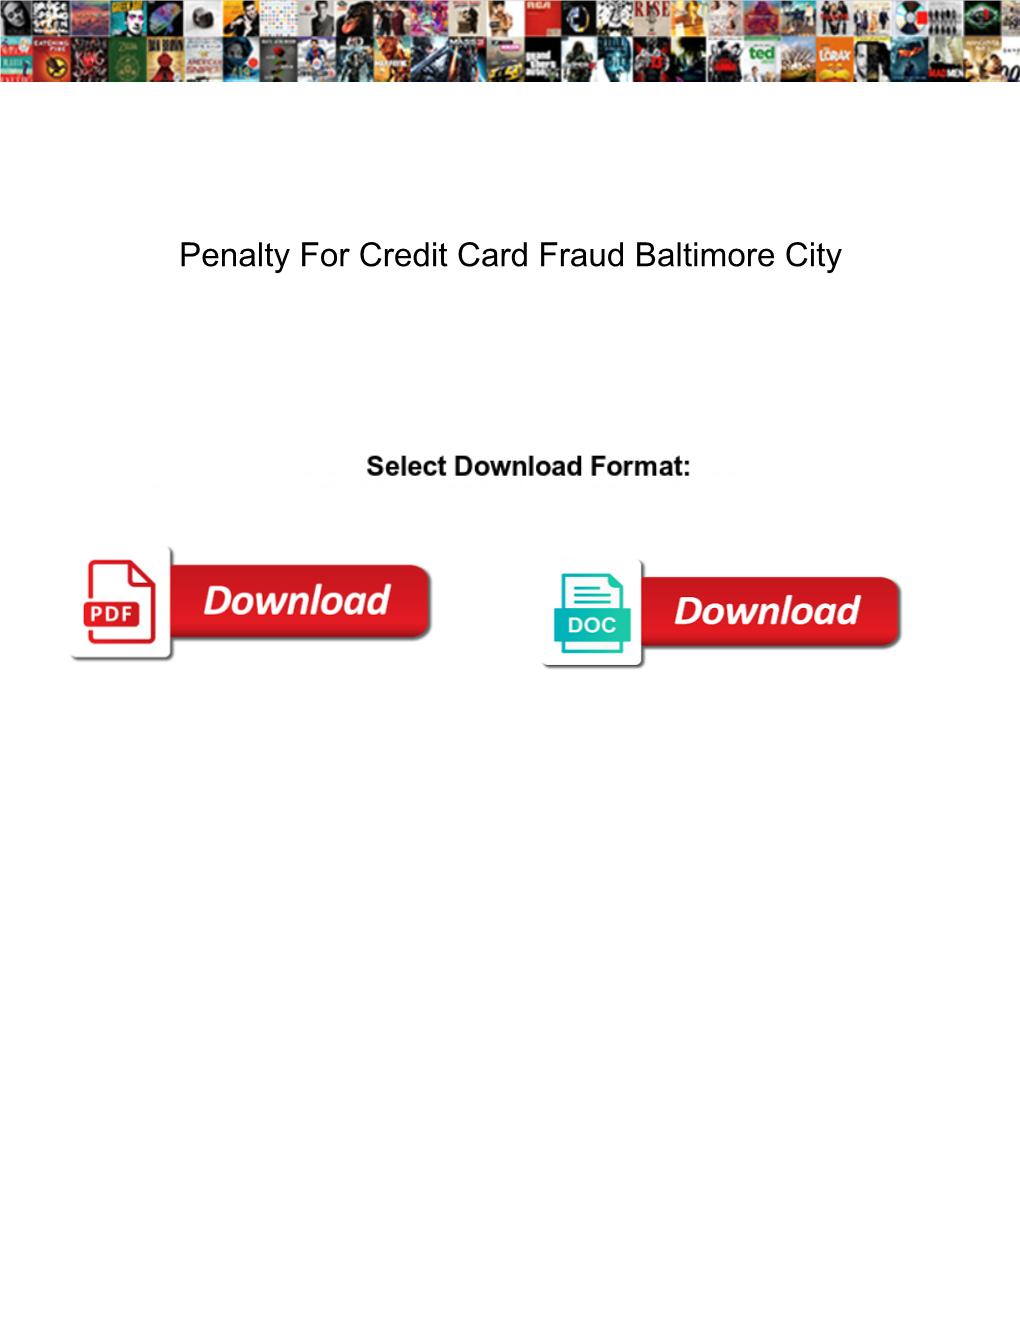 Penalty for Credit Card Fraud Baltimore City